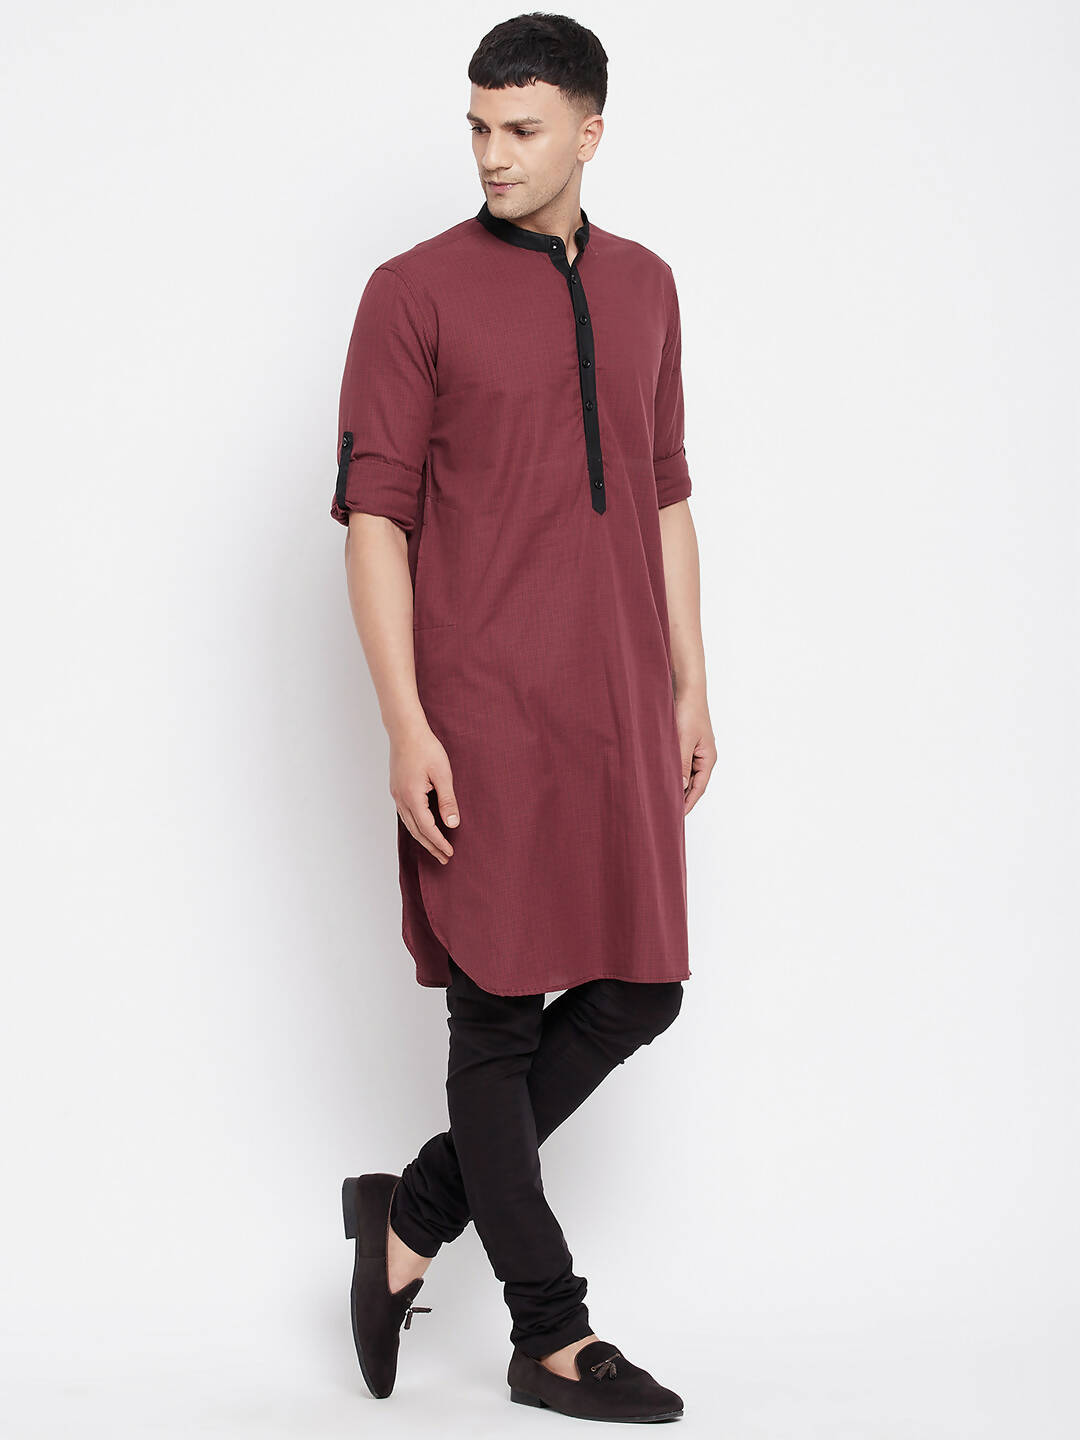 Even Apparels Maroon Pure Cotton Men's Kurta With Contrast Collar And Placket - Distacart